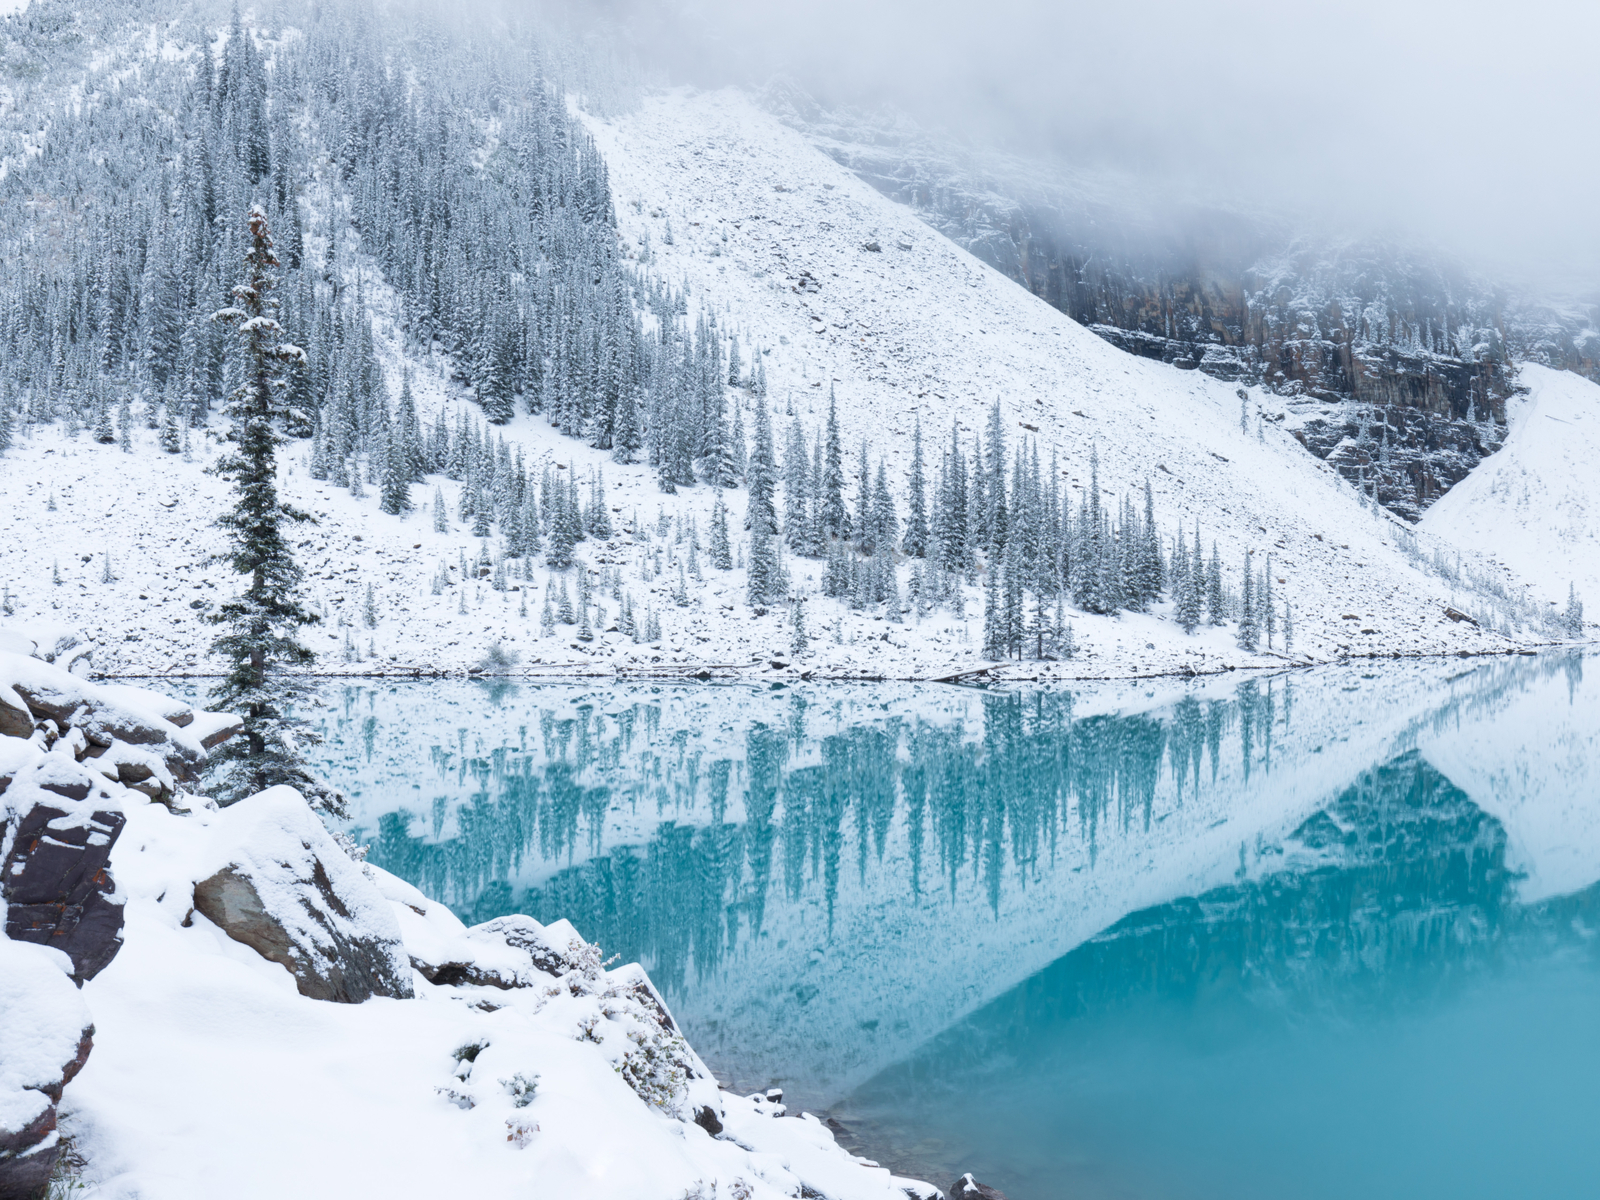 Lake Moraine pictured during the worst time to visit Banff with lots of snow and closures